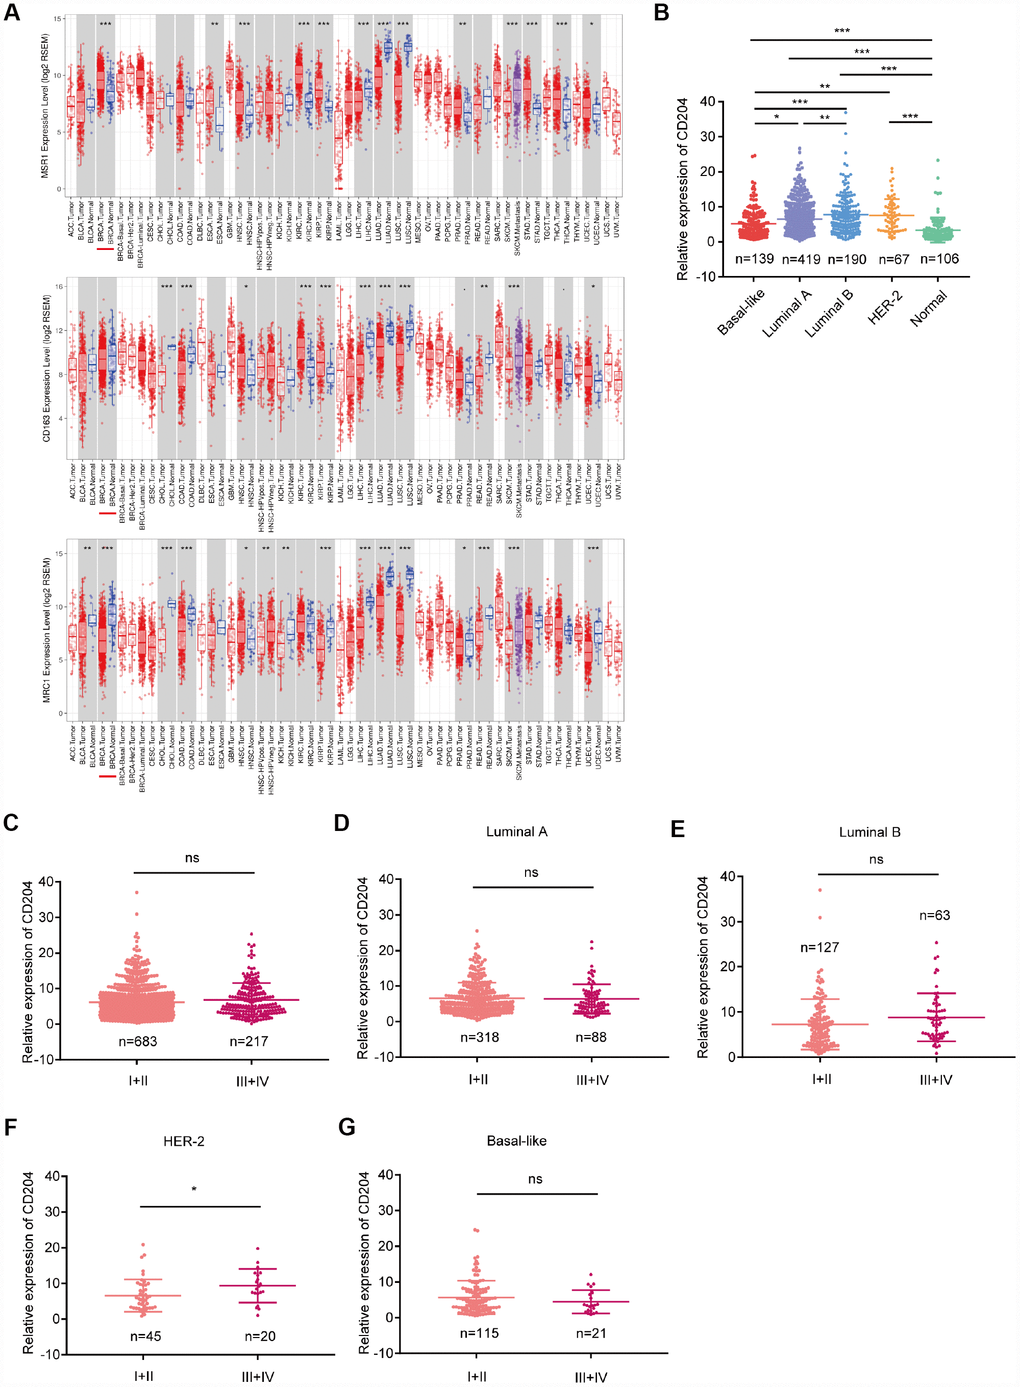 Comparison of CD204, CD163, and CD206 mRNA expressions between tumors and normal tissues (A) comparison of CD204 mRNA expression between different subtypes (B) of all cases of breast cancer between stage I-II and III-IV (C), and in each subtype, including luminal A (D), luminal B (E), HER2-positive (F), and basal-like (G) cancers.